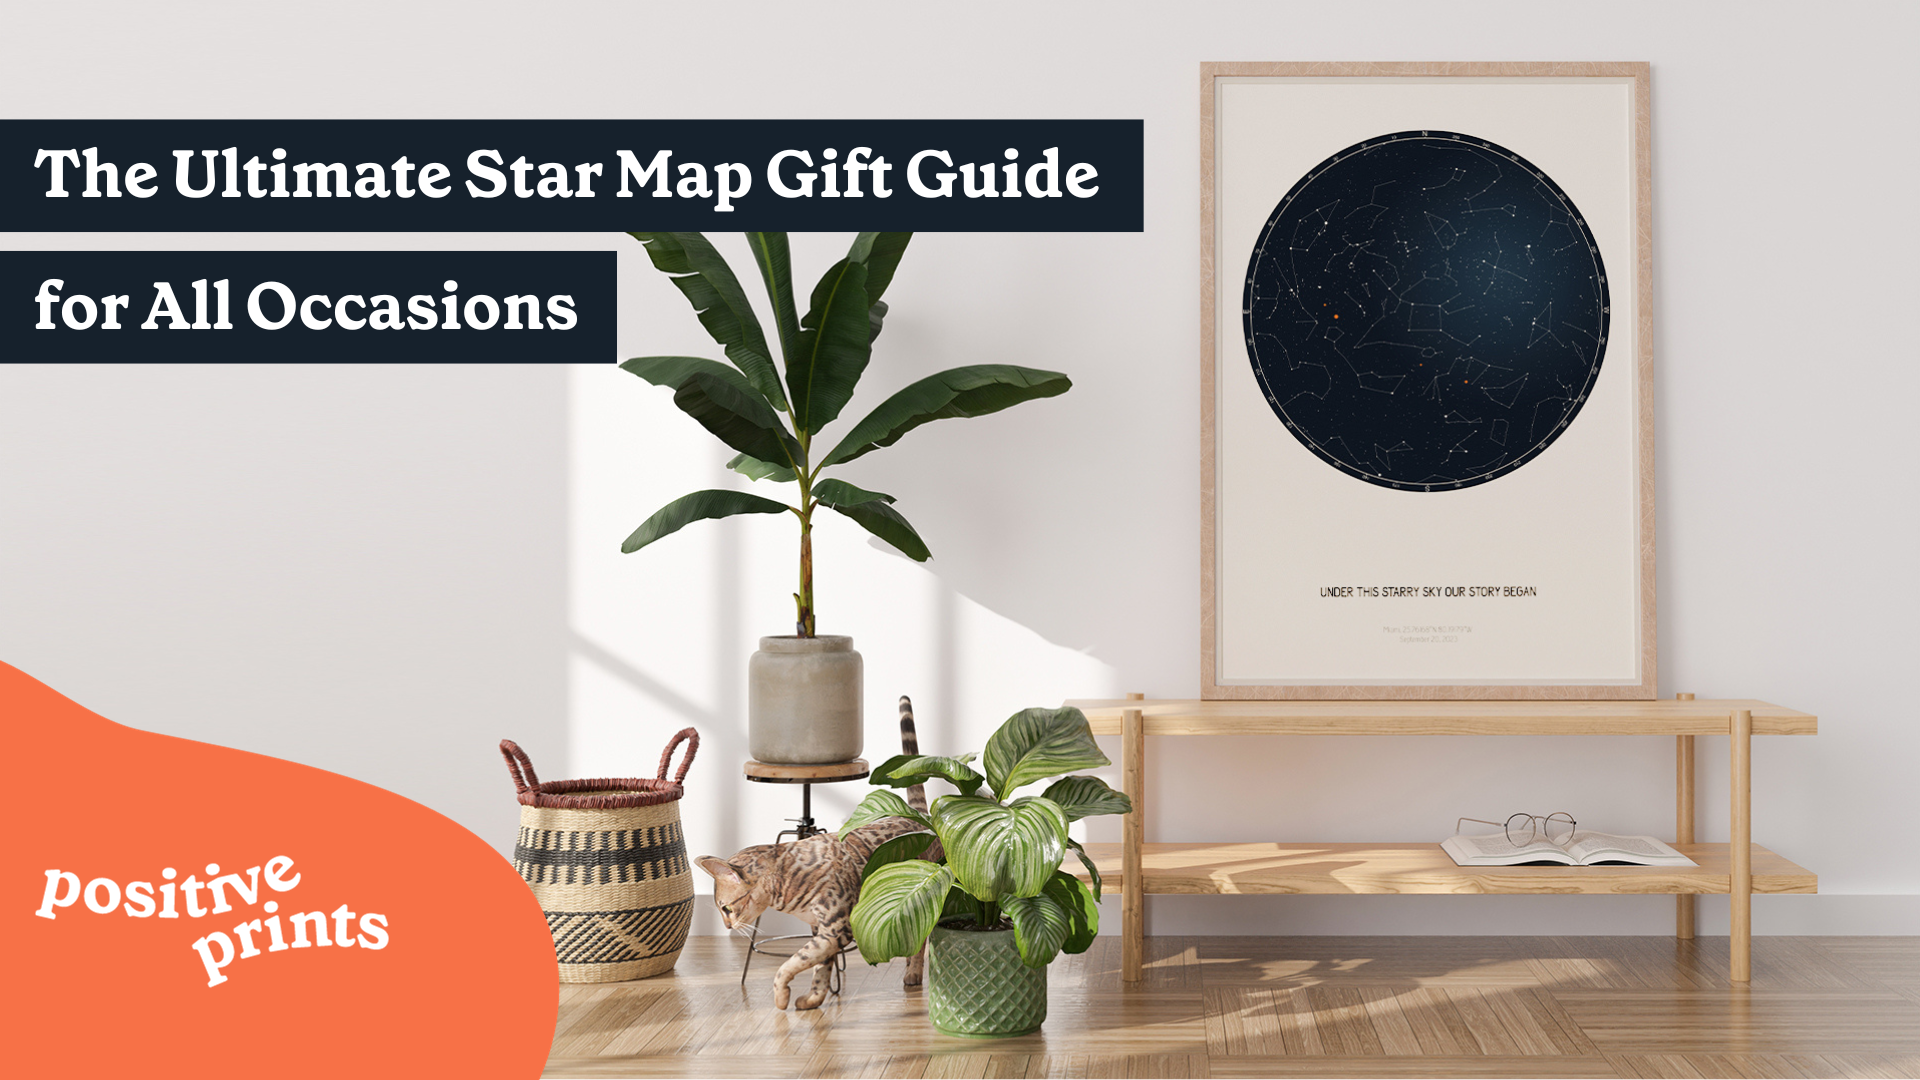 The Ultimate Star Map Gift Guide for All Occasions